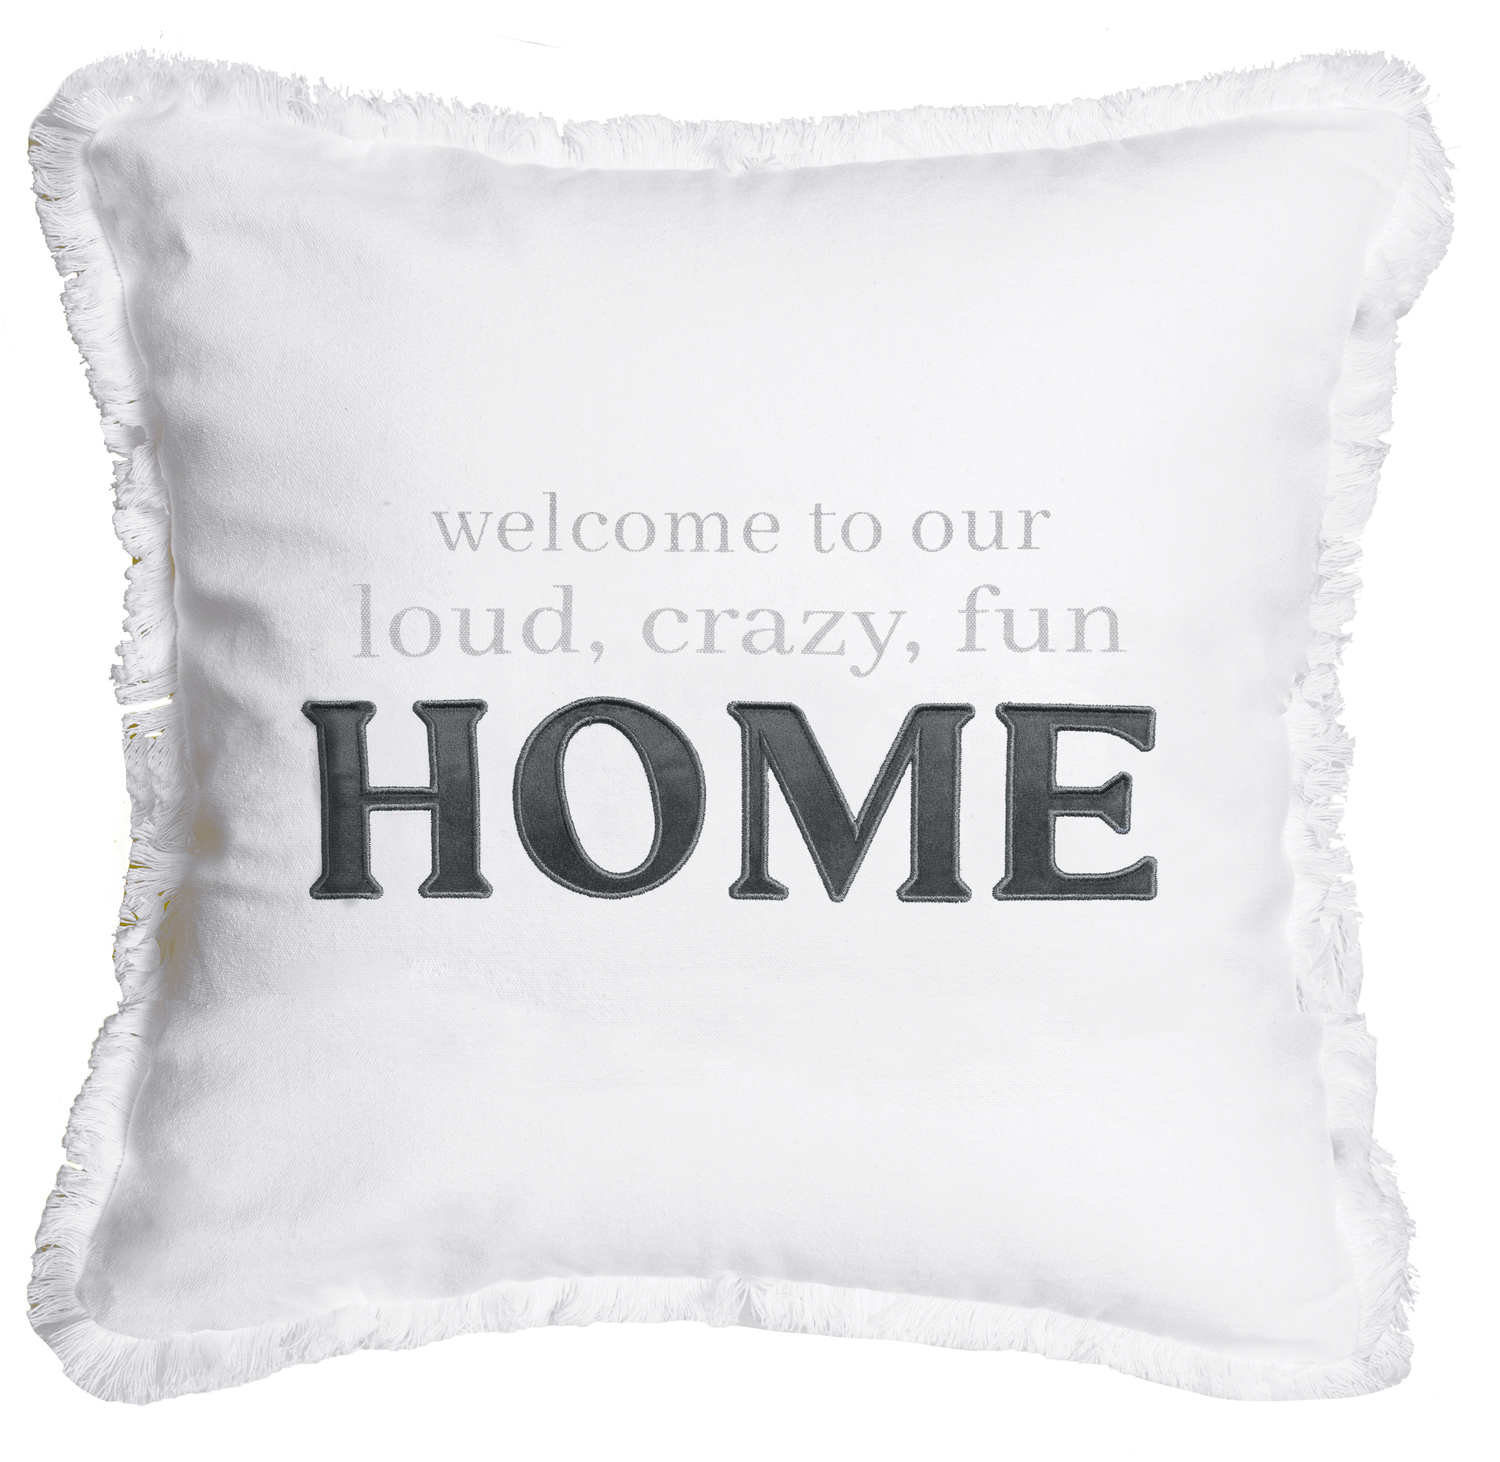 Crazy Fun Home by Tossing Words Around - Crazy Fun Home - 18" Throw Pillow Cover